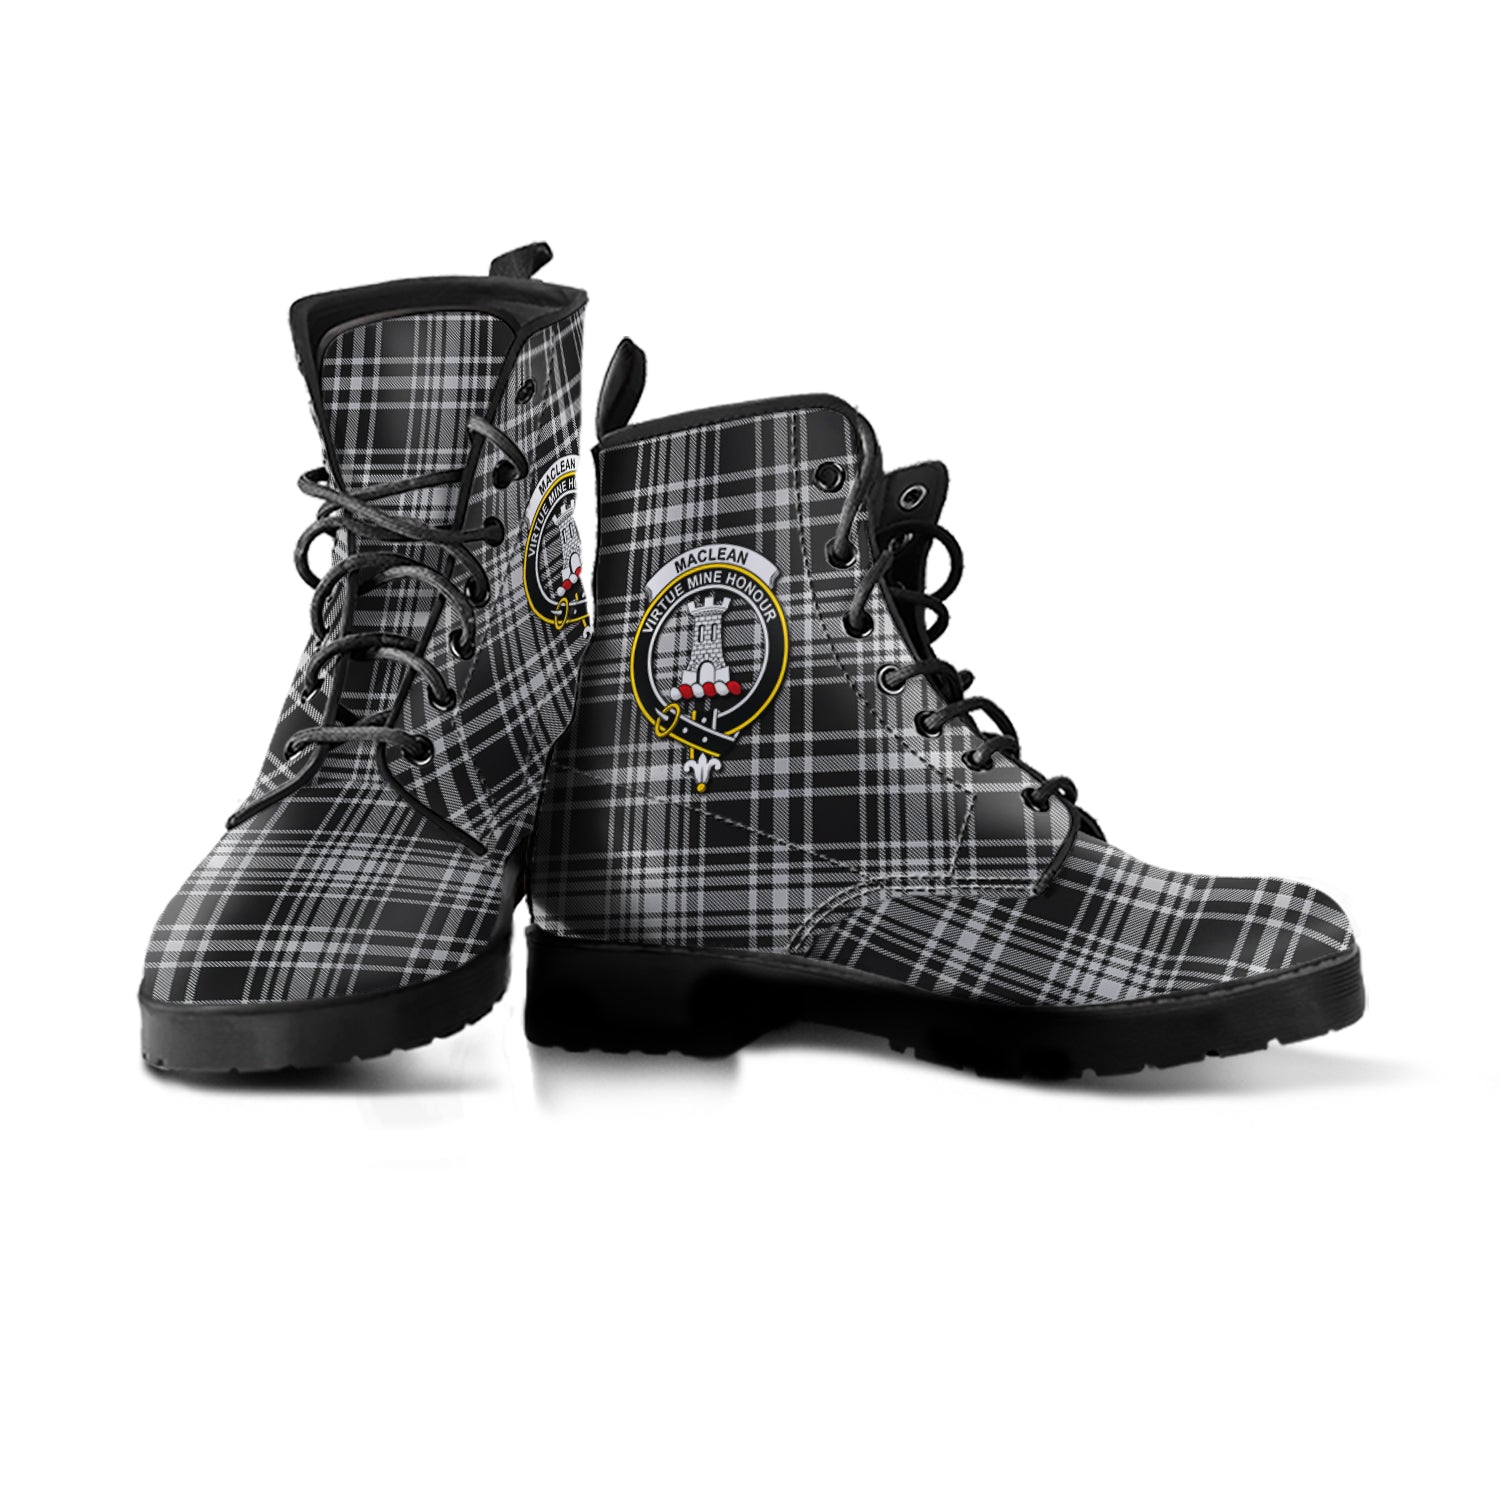 scottish-maclean-black-and-white-clan-crest-tartan-leather-boots